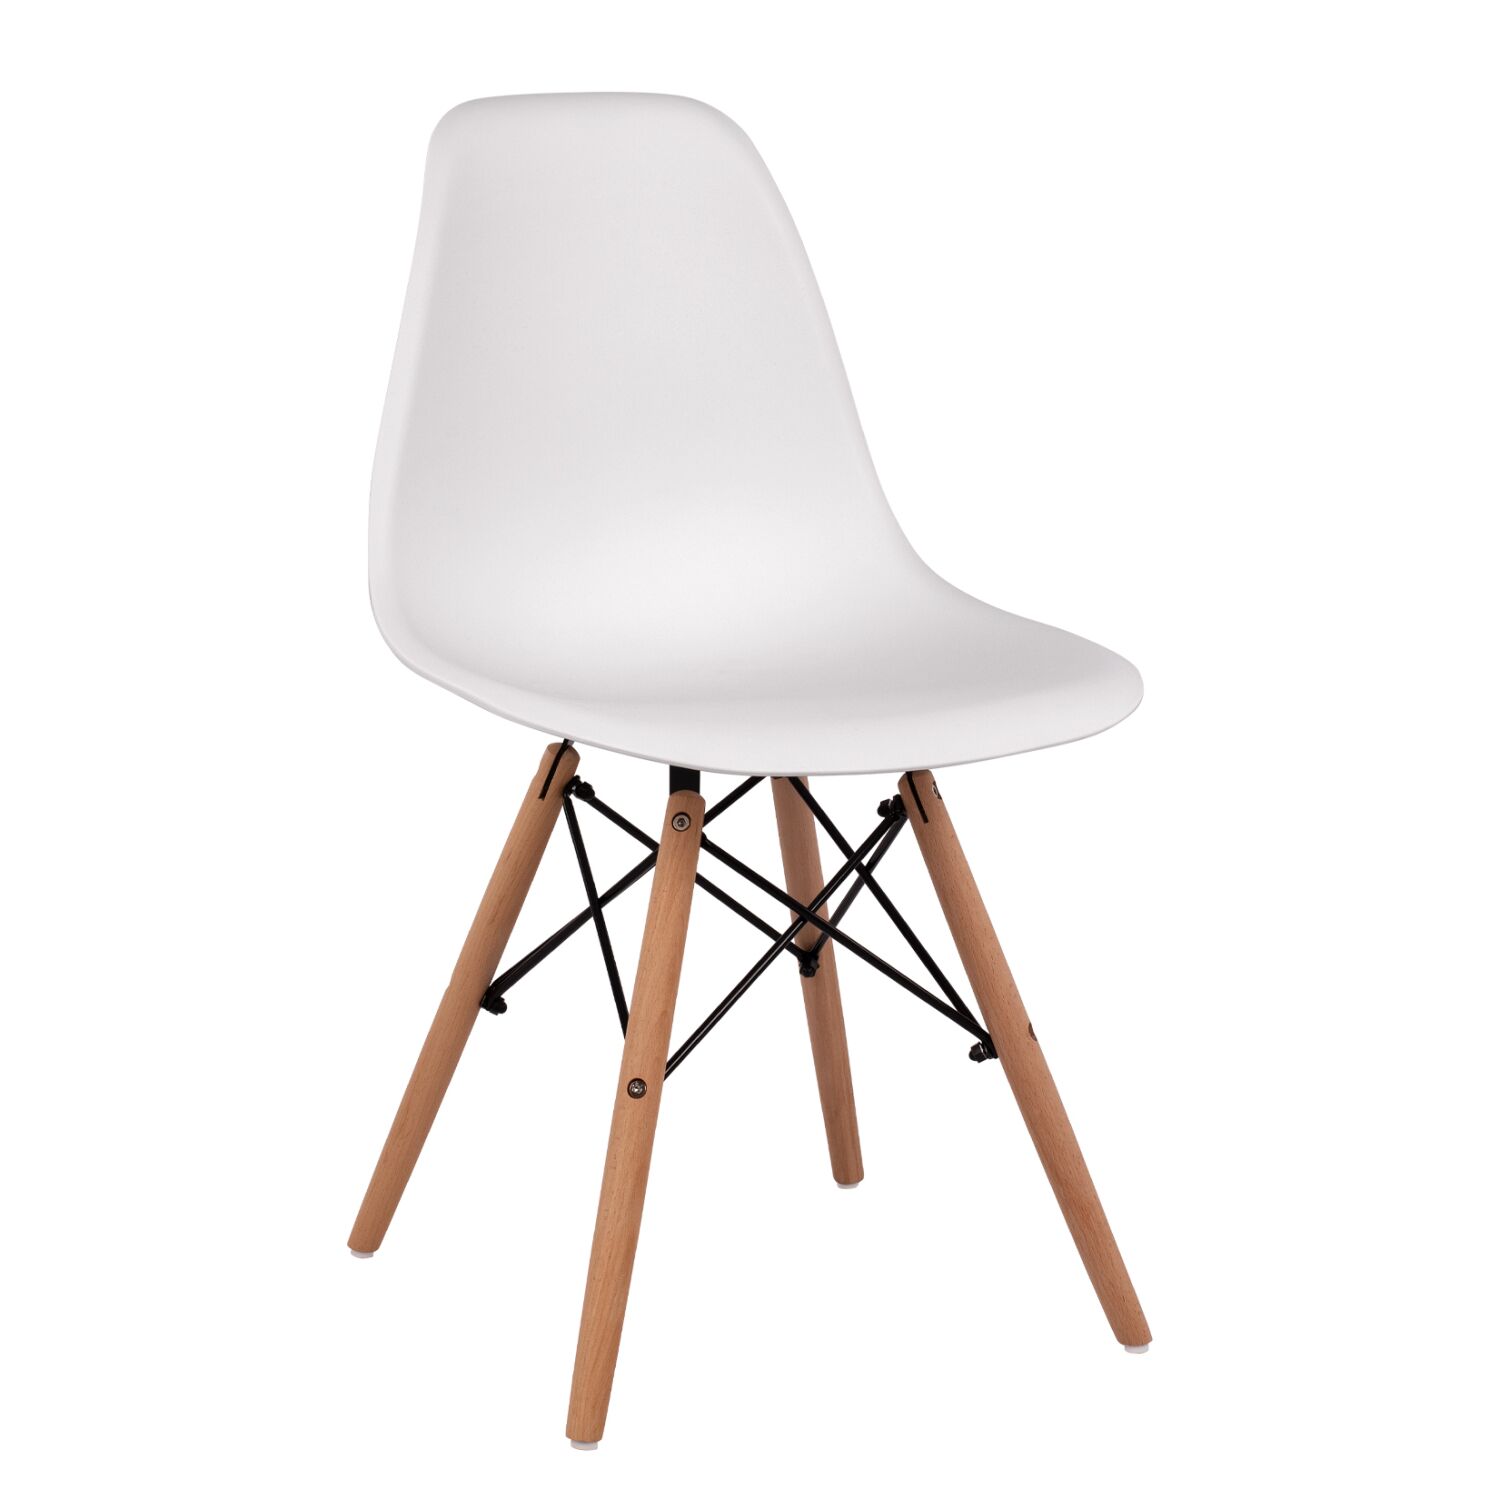 Chair with wooden legs and seat Twistn PP White HM8460.01 46x50x82 cm